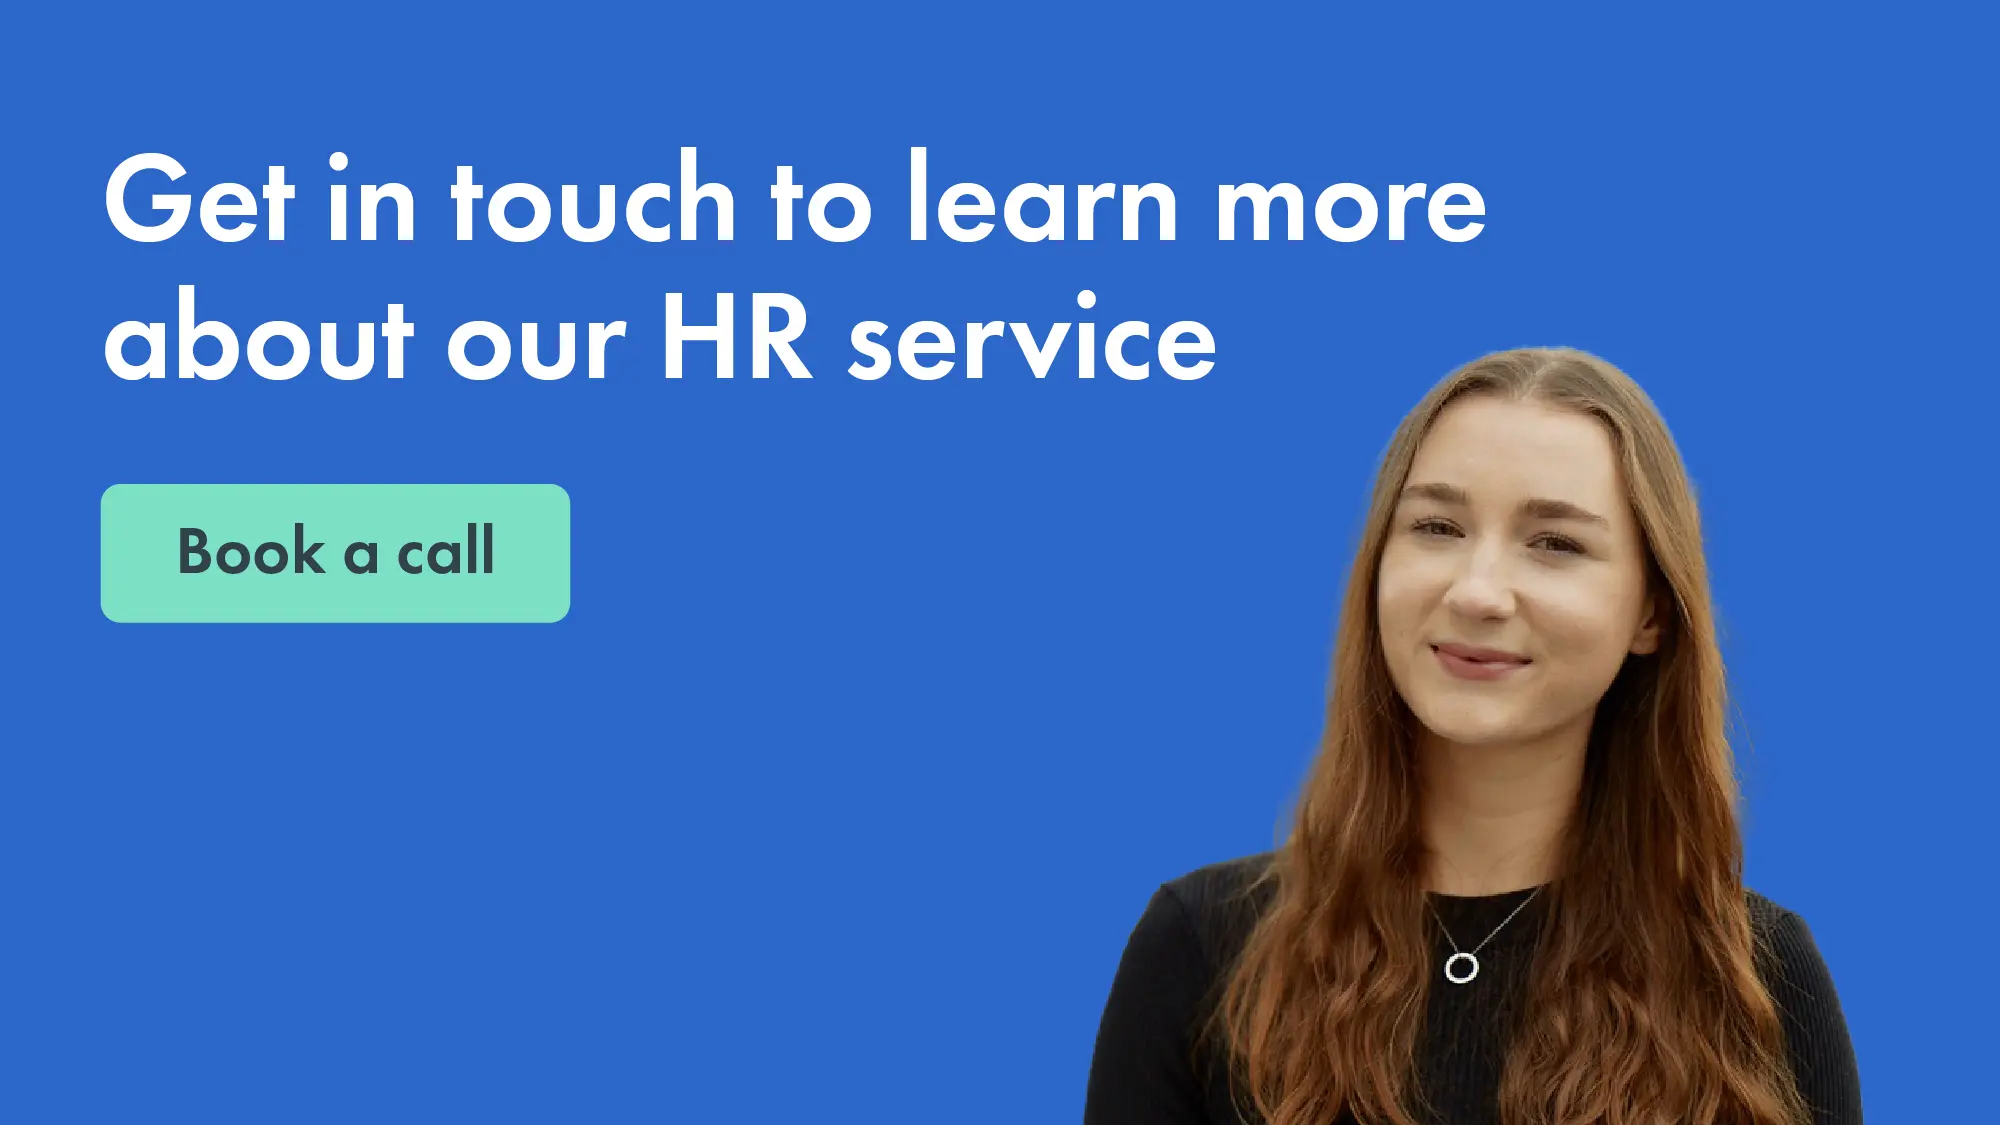 Book a call to find out more about CharlieHR